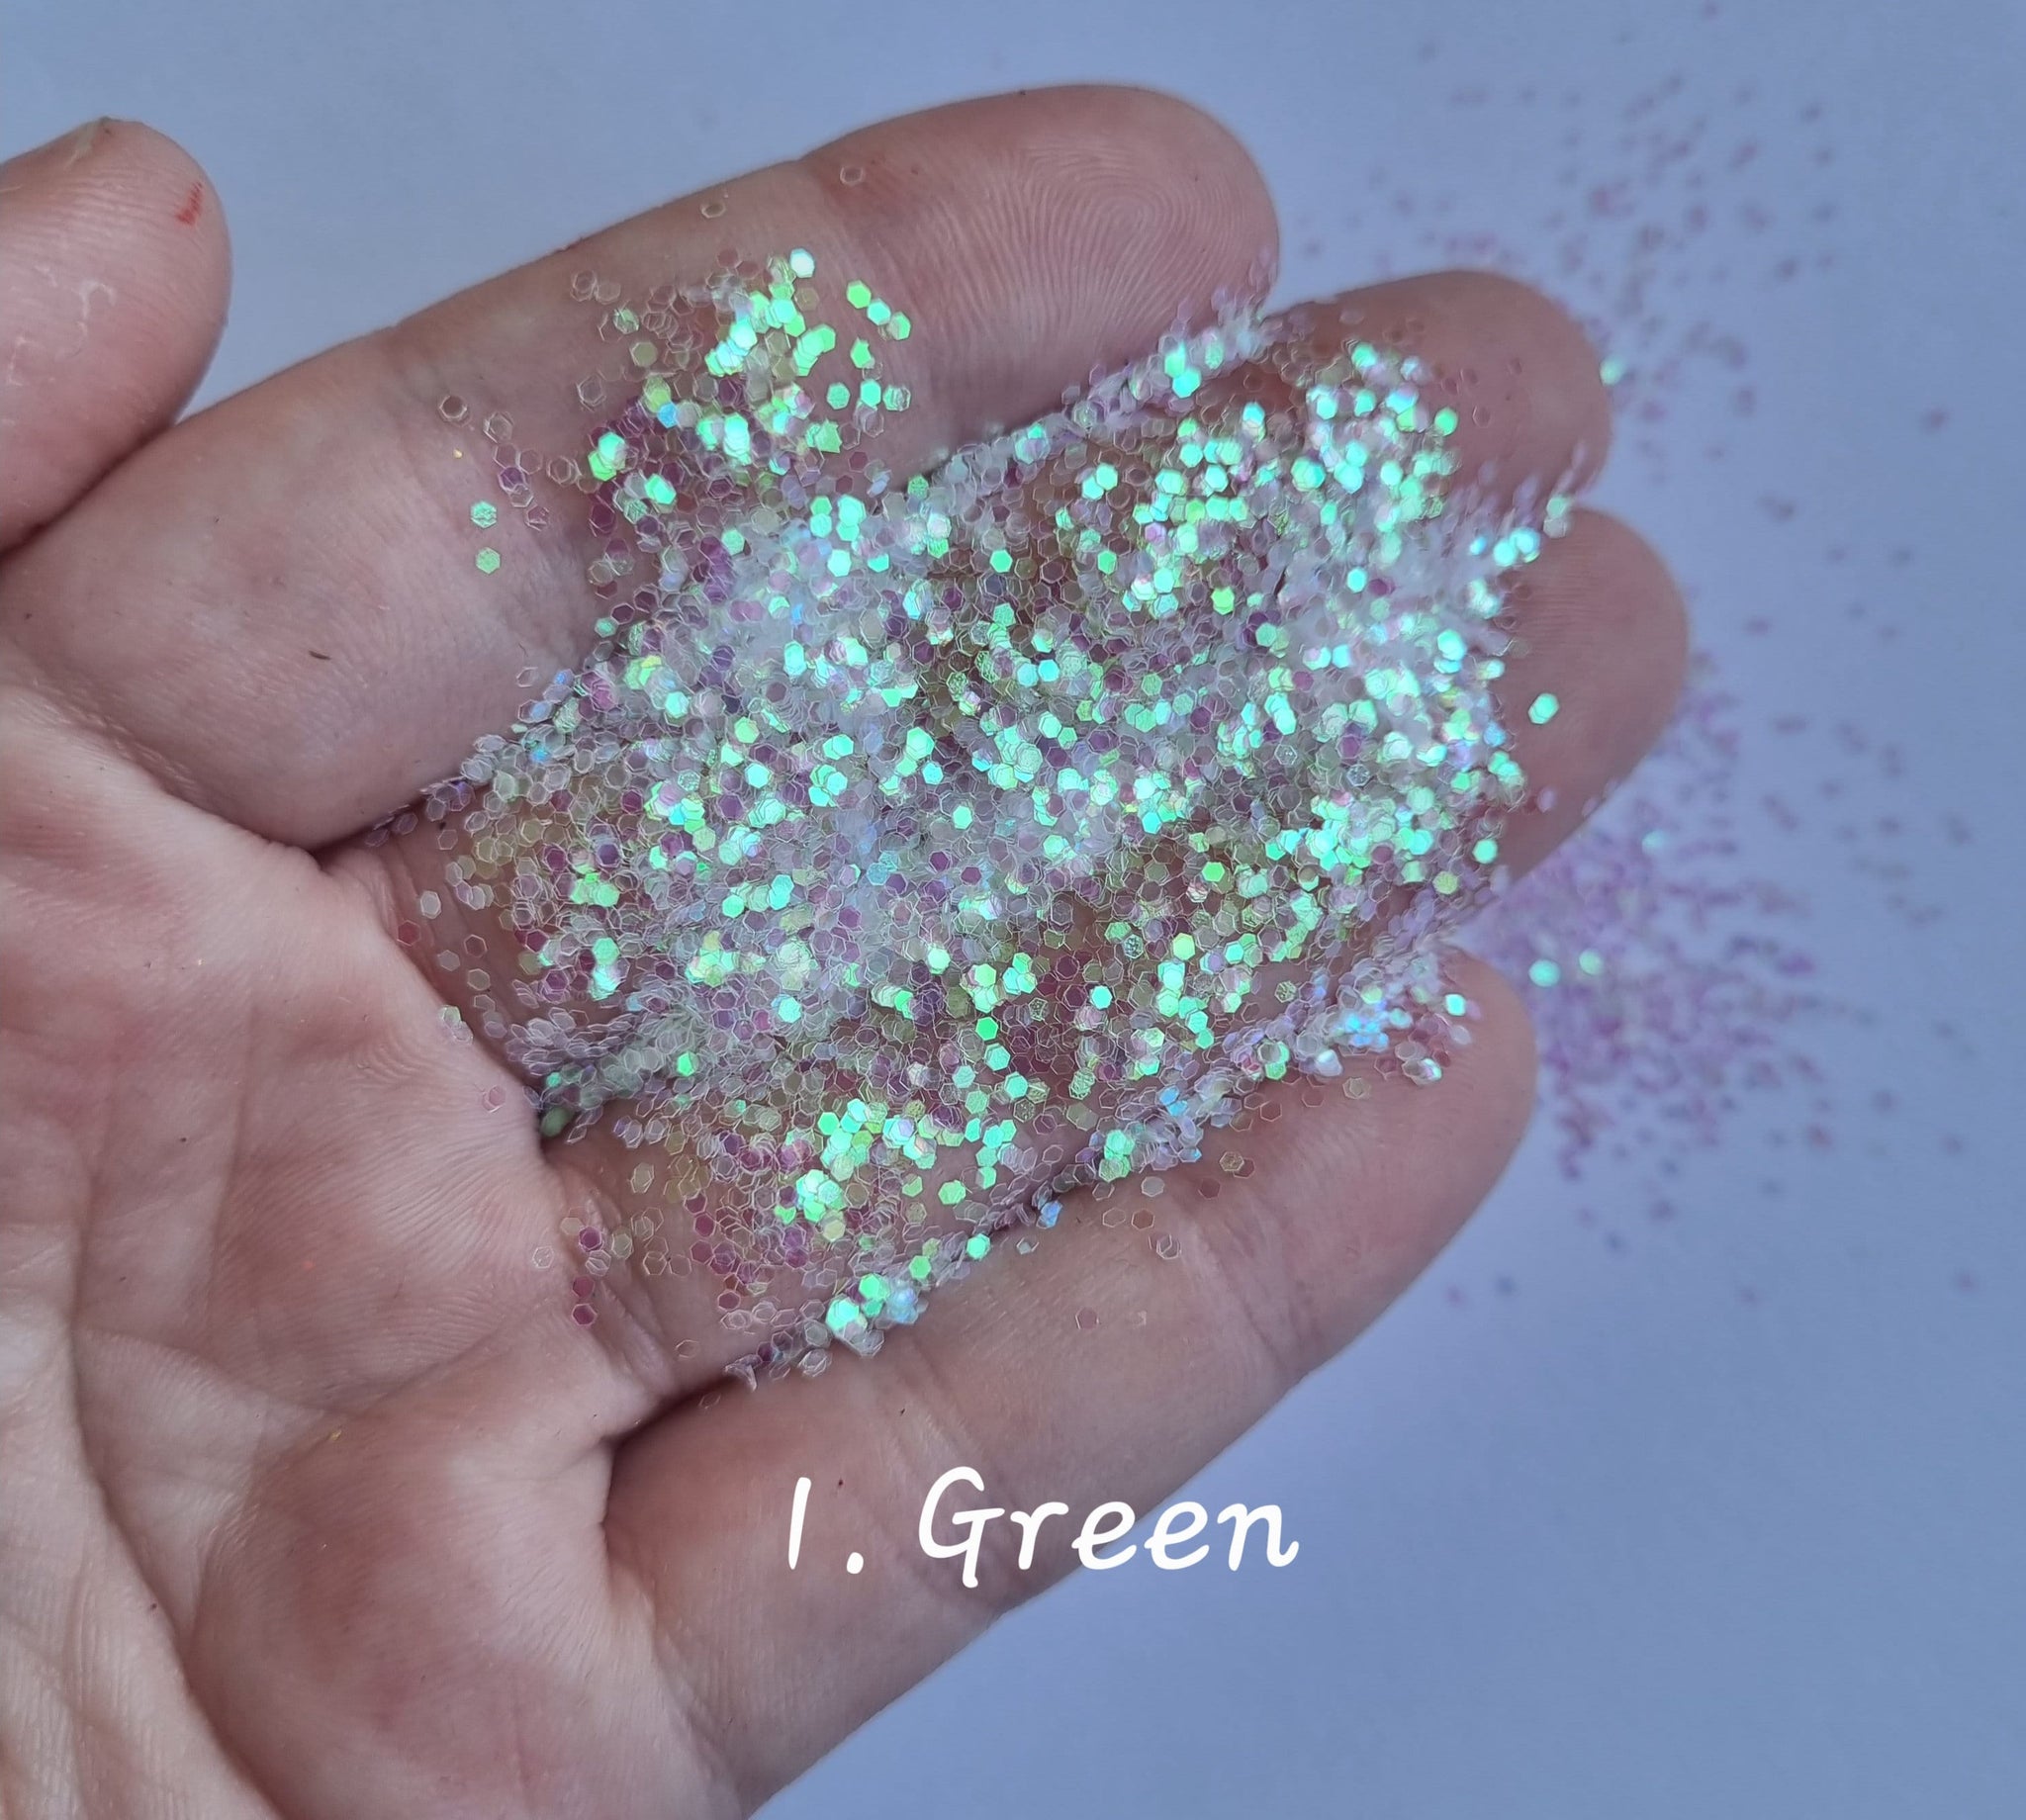 50g Holographic Small Nail Glitter, Holographic Sequins, Iridescent Mixed Hexagon, Sparkly Body Glitter, Manicure Glitter, Laser glitter